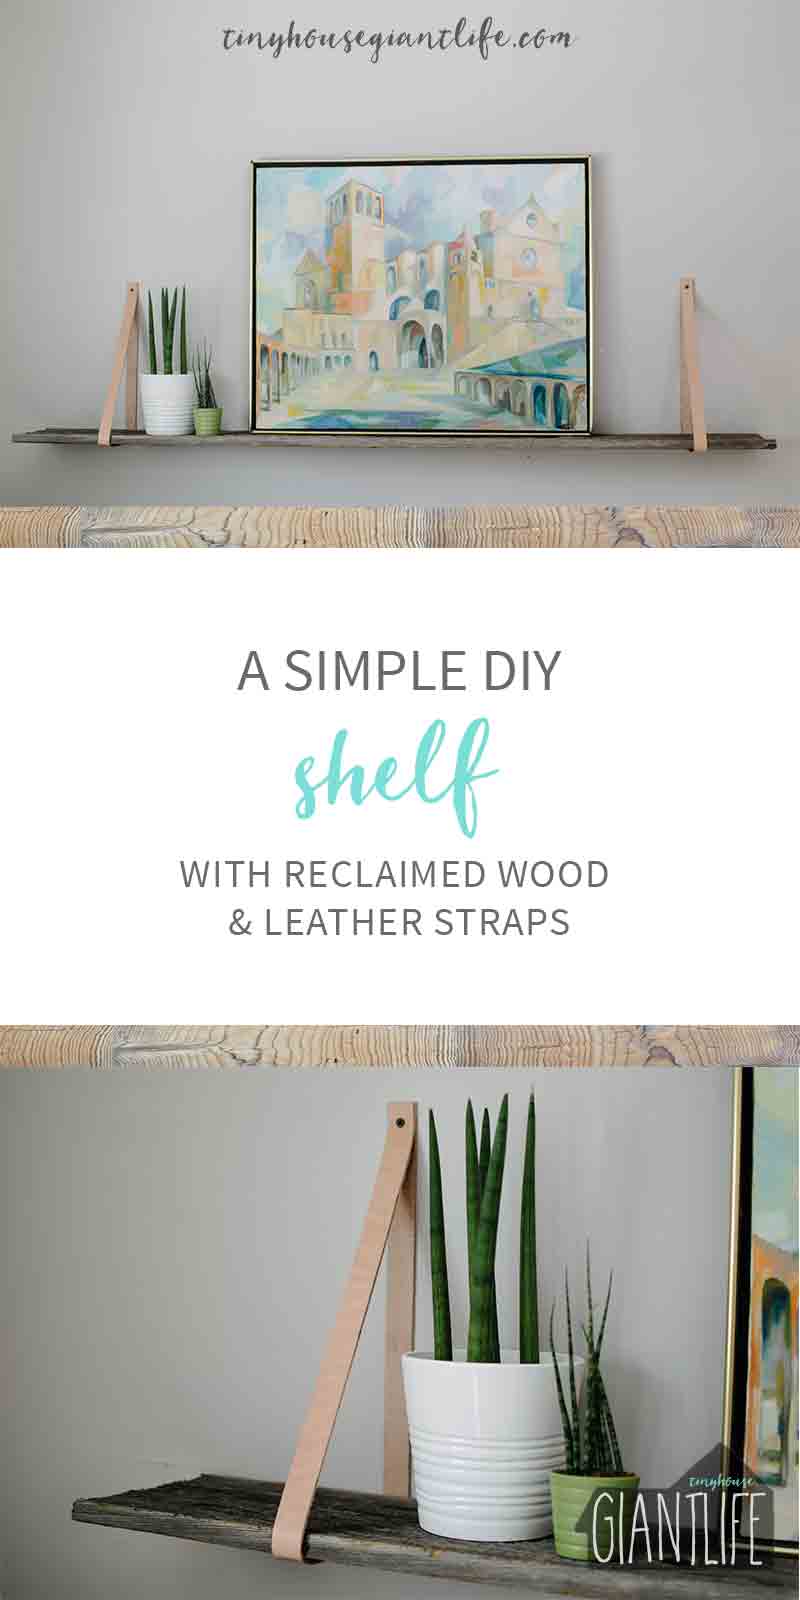 This reclaimed barn board shelf and leather strap shelf is a quick, easy, DIY. The shelf provides a great ledge for art and is simple to create.